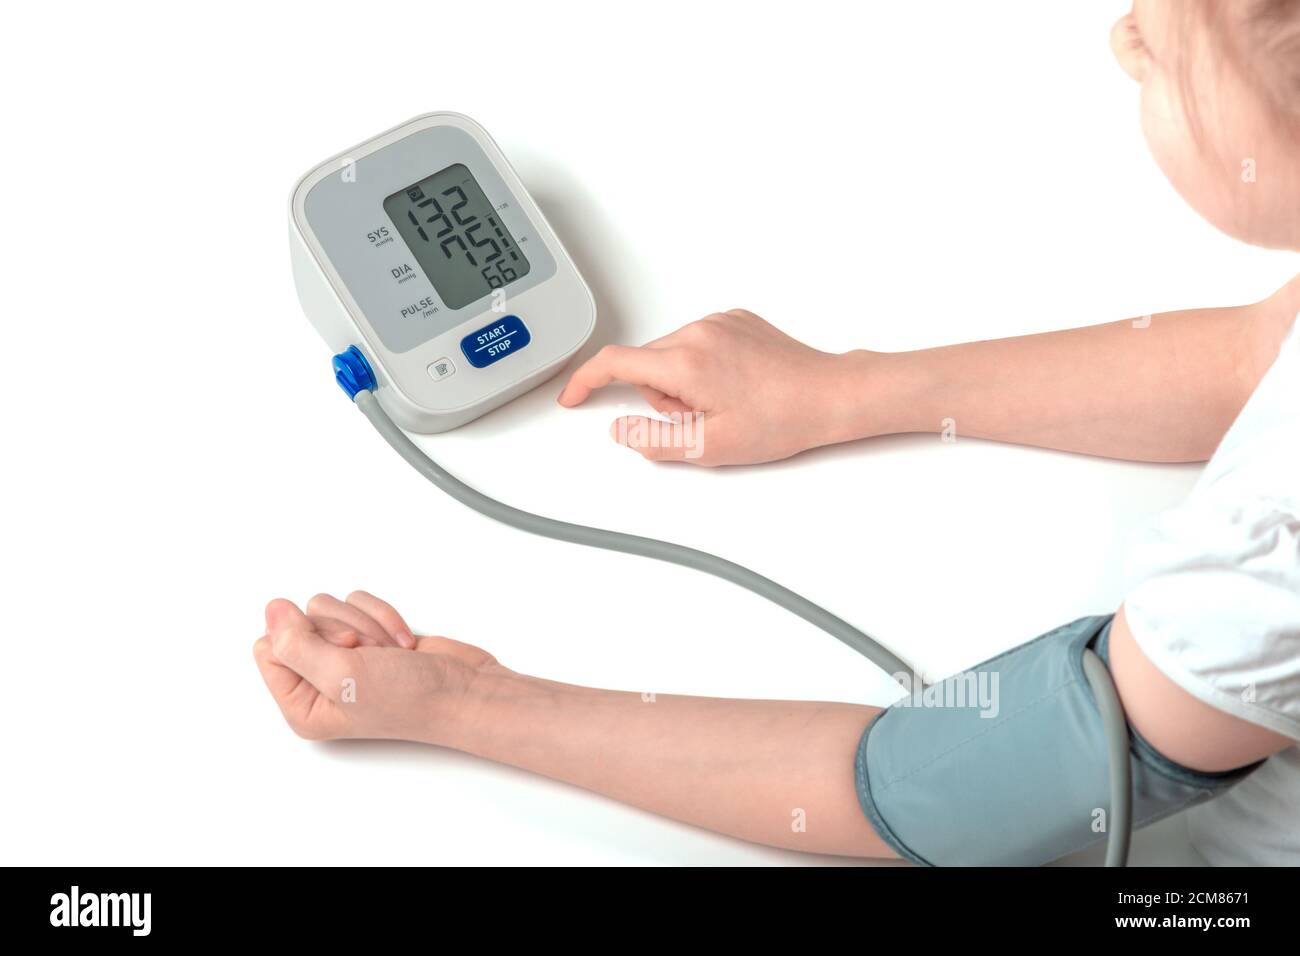 https://c8.alamy.com/comp/2CM8671/child-girl-measures-her-blood-pressure-herself-pediatric-cardiology-concept-isolated-white-background-2CM8671.jpg